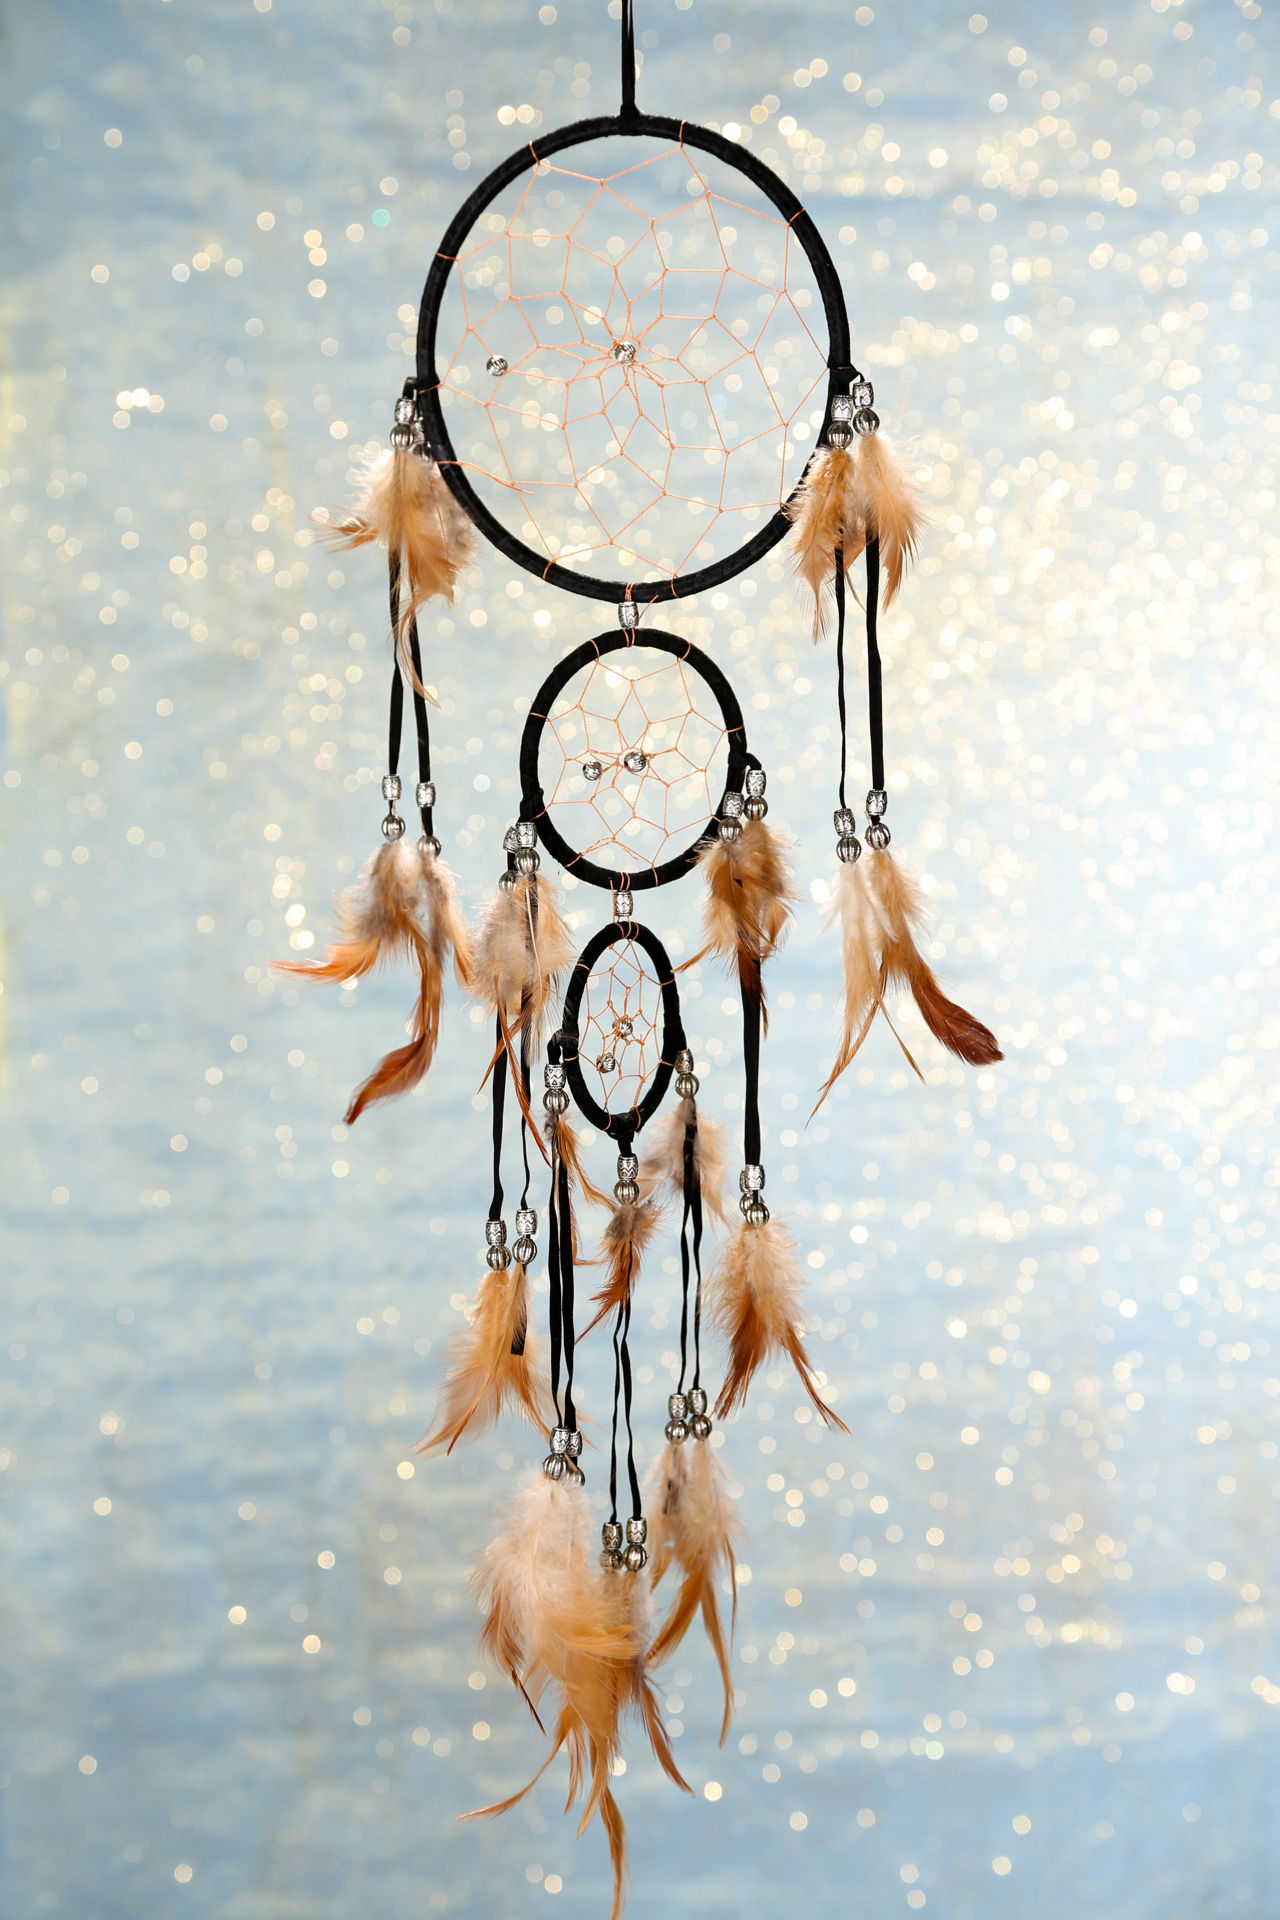 Download Here's How to Make a Dream Catcher in 5 Simple Steps ...